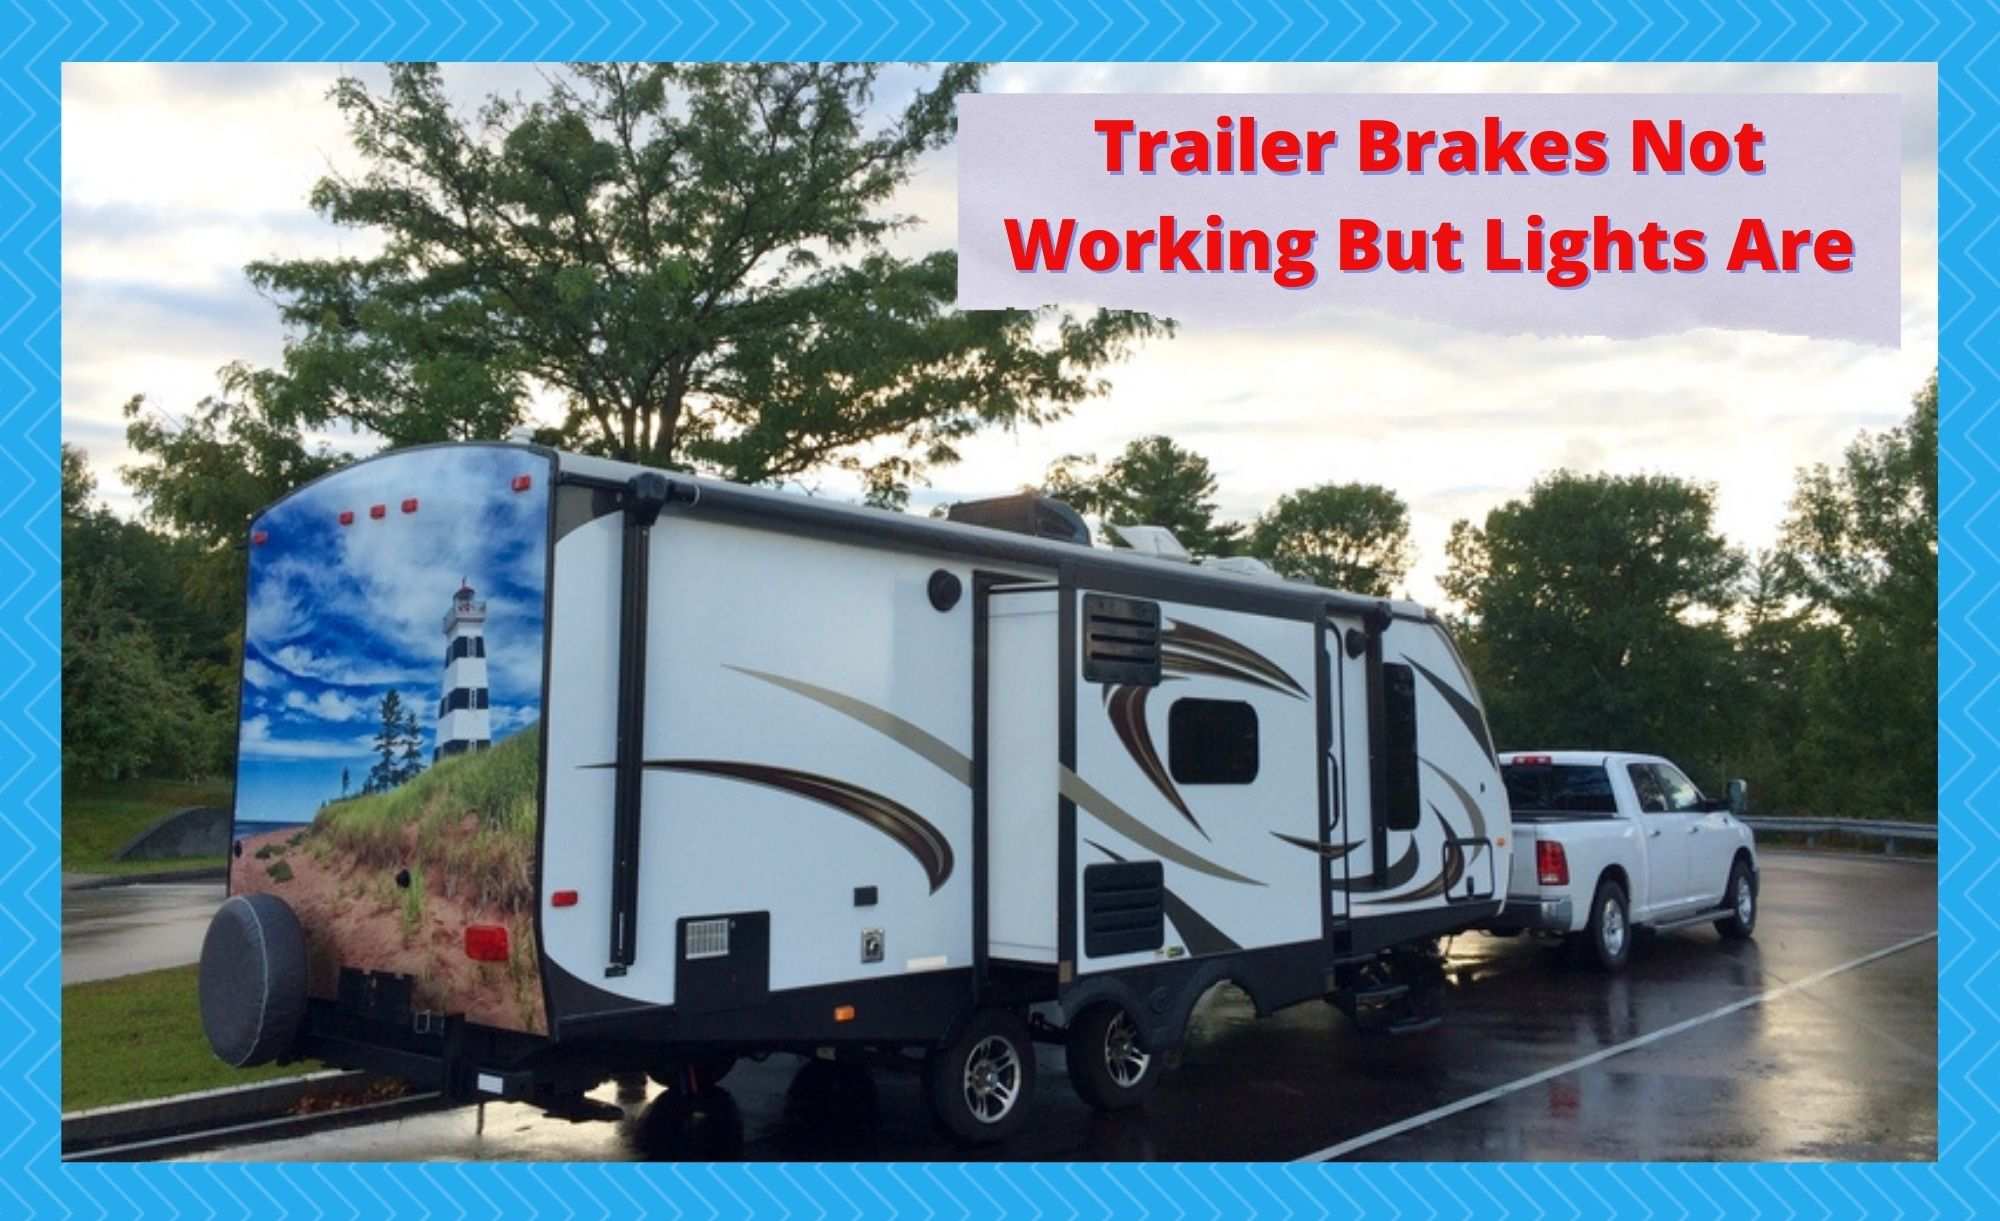 trailer brakes not working but lights are